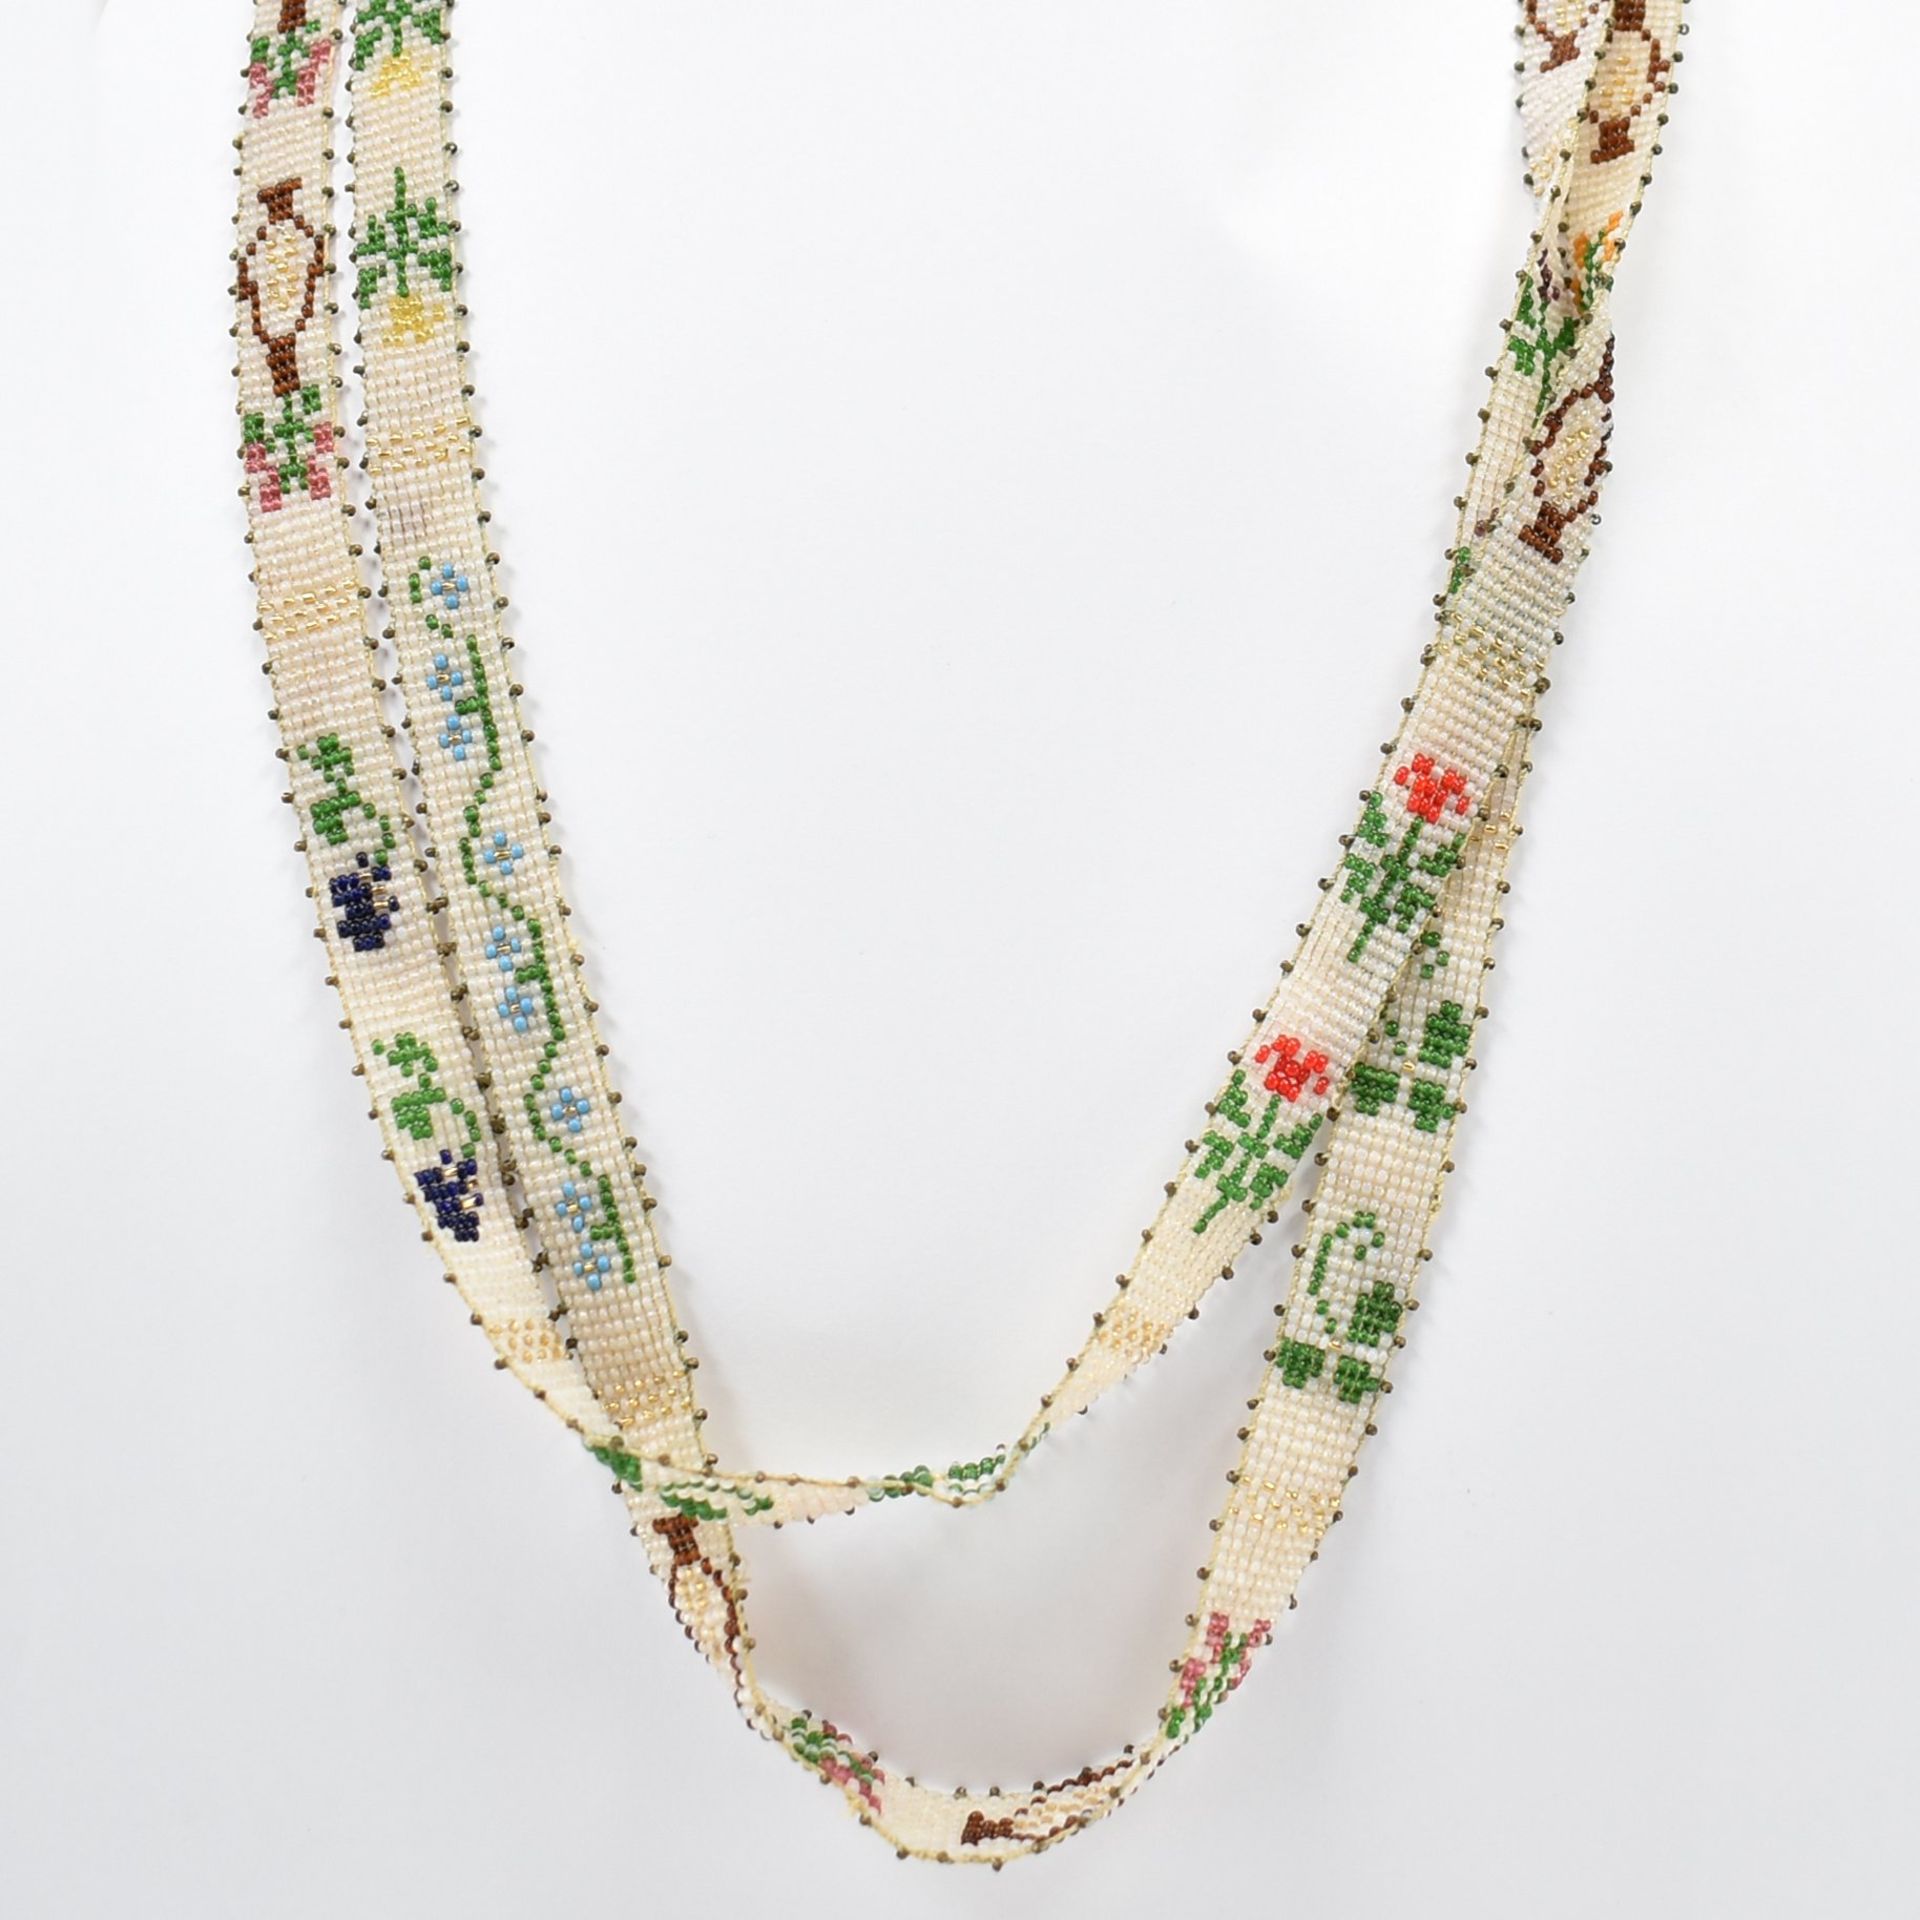 FOUR ART DECO MICRO BEAD NECKLACES - Image 9 of 10